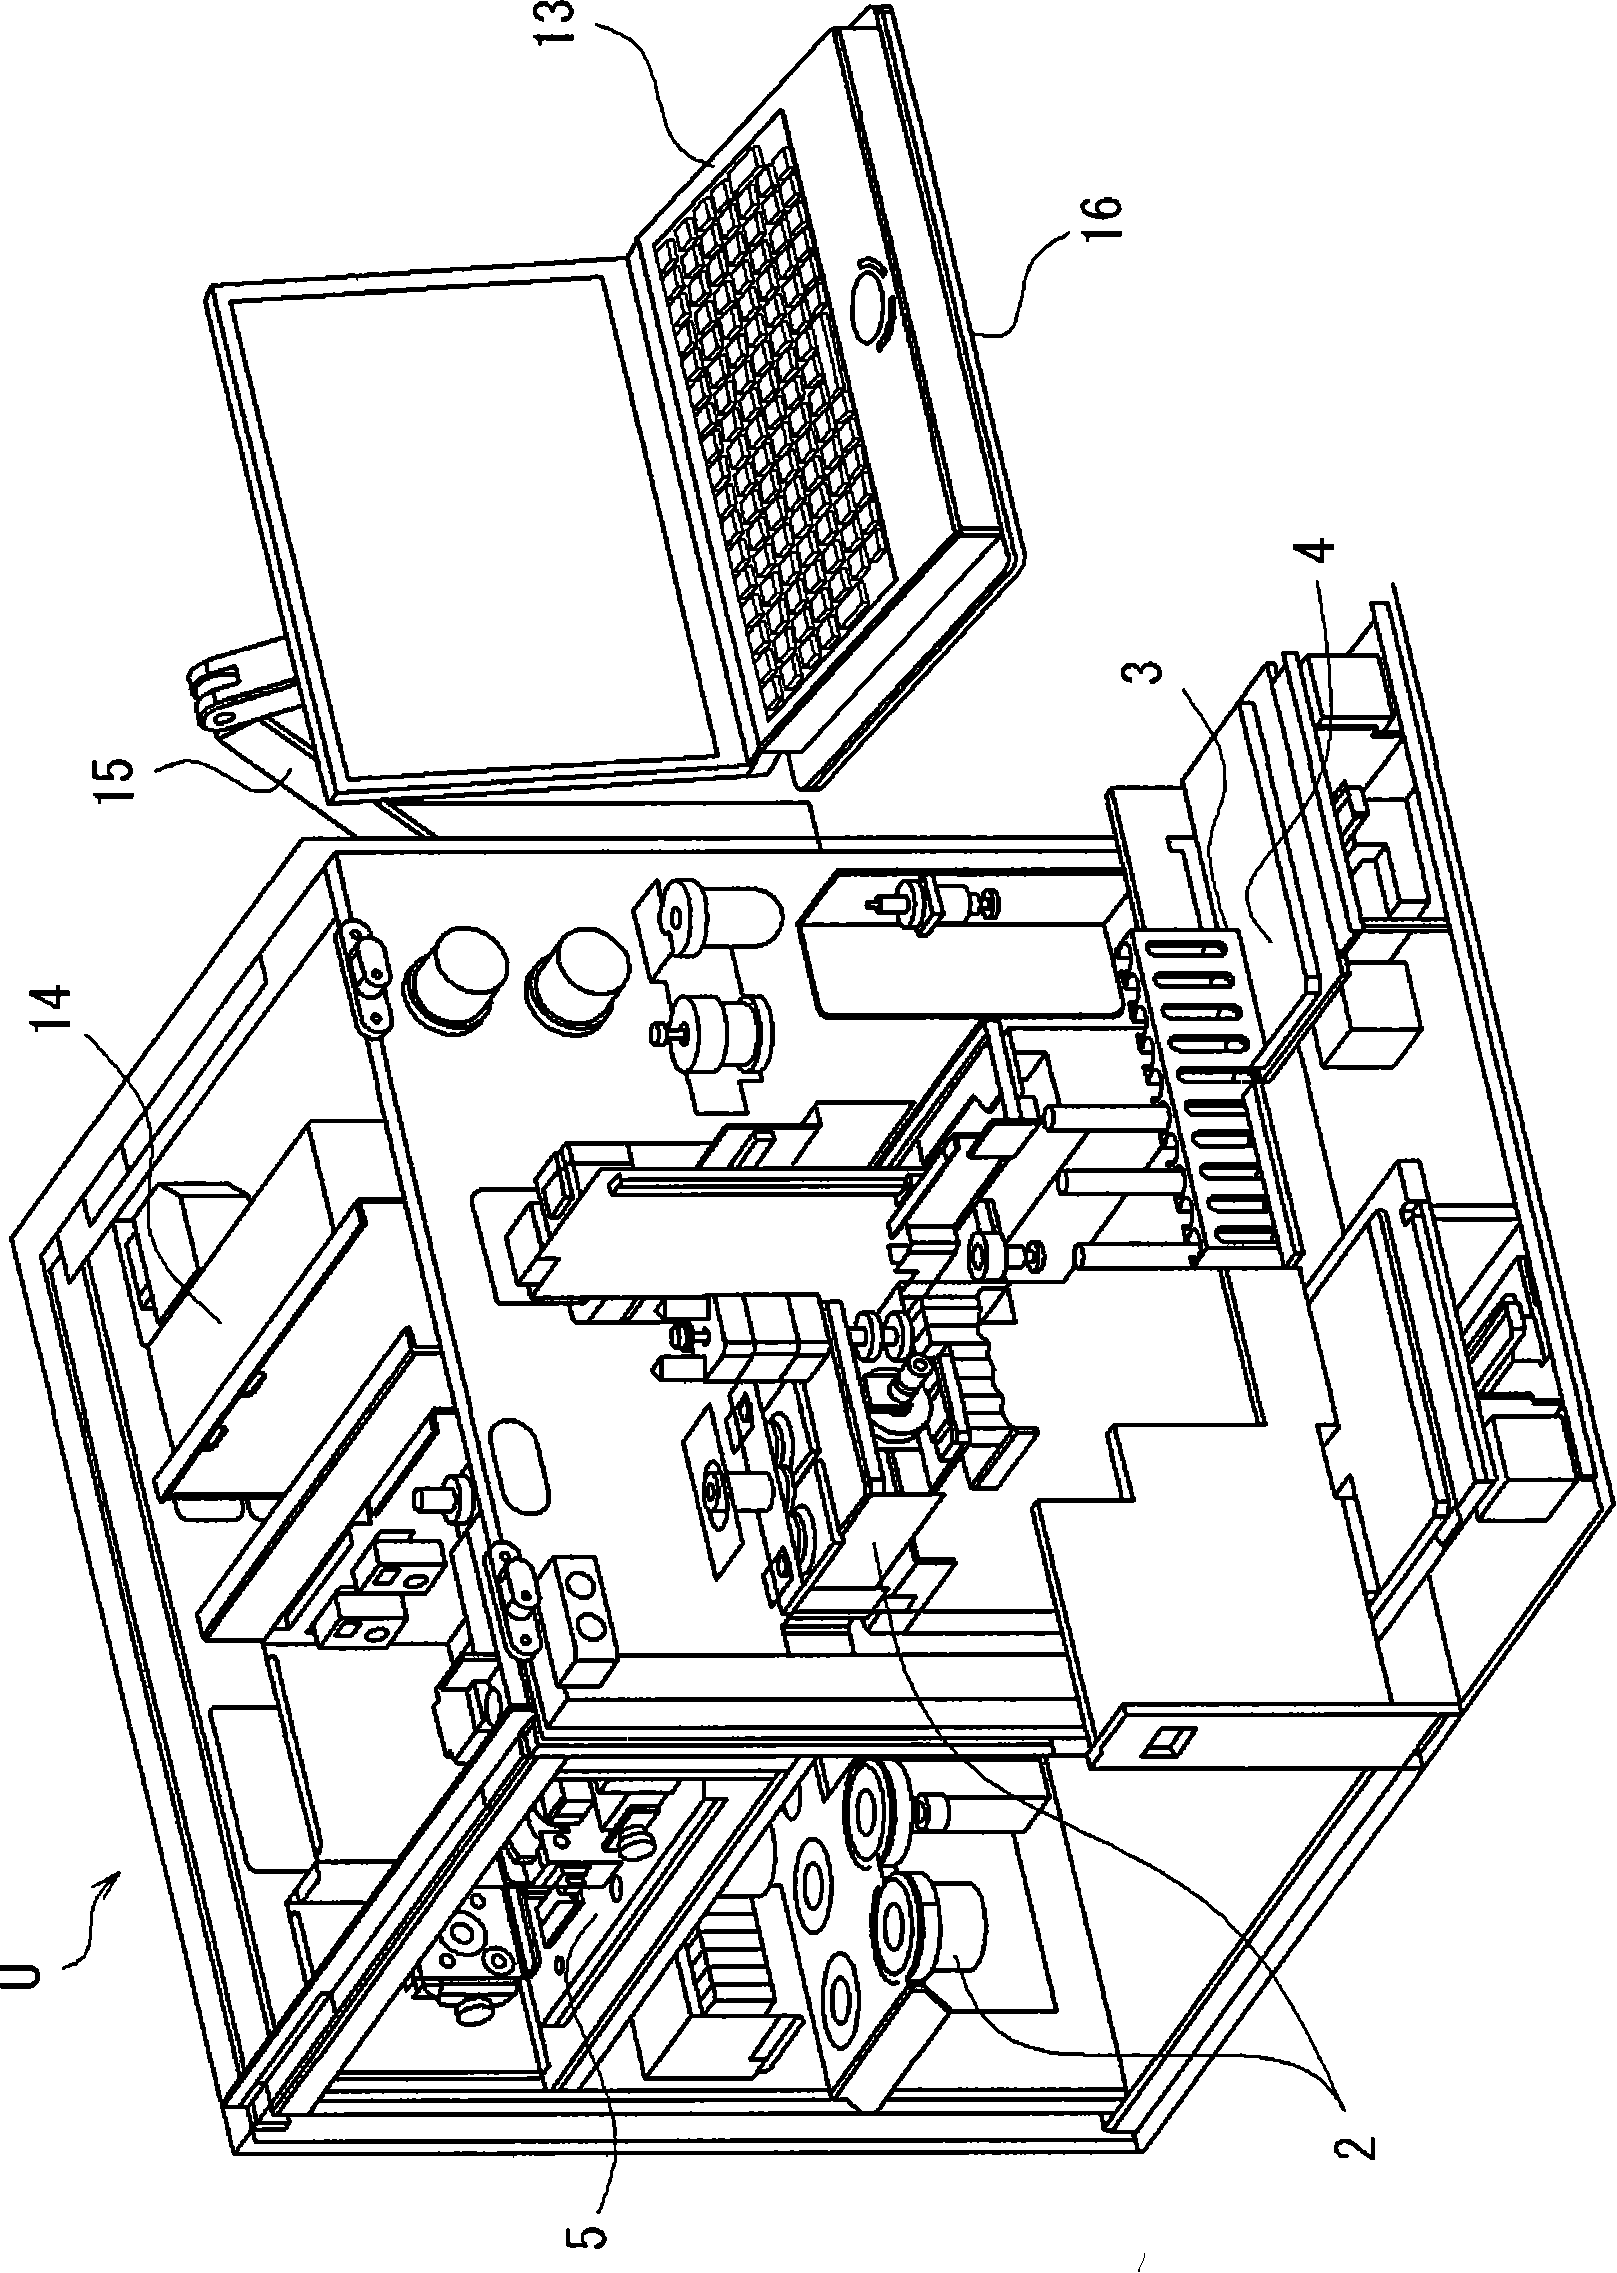 Apparatus for analyzing particles in urine and method thereof